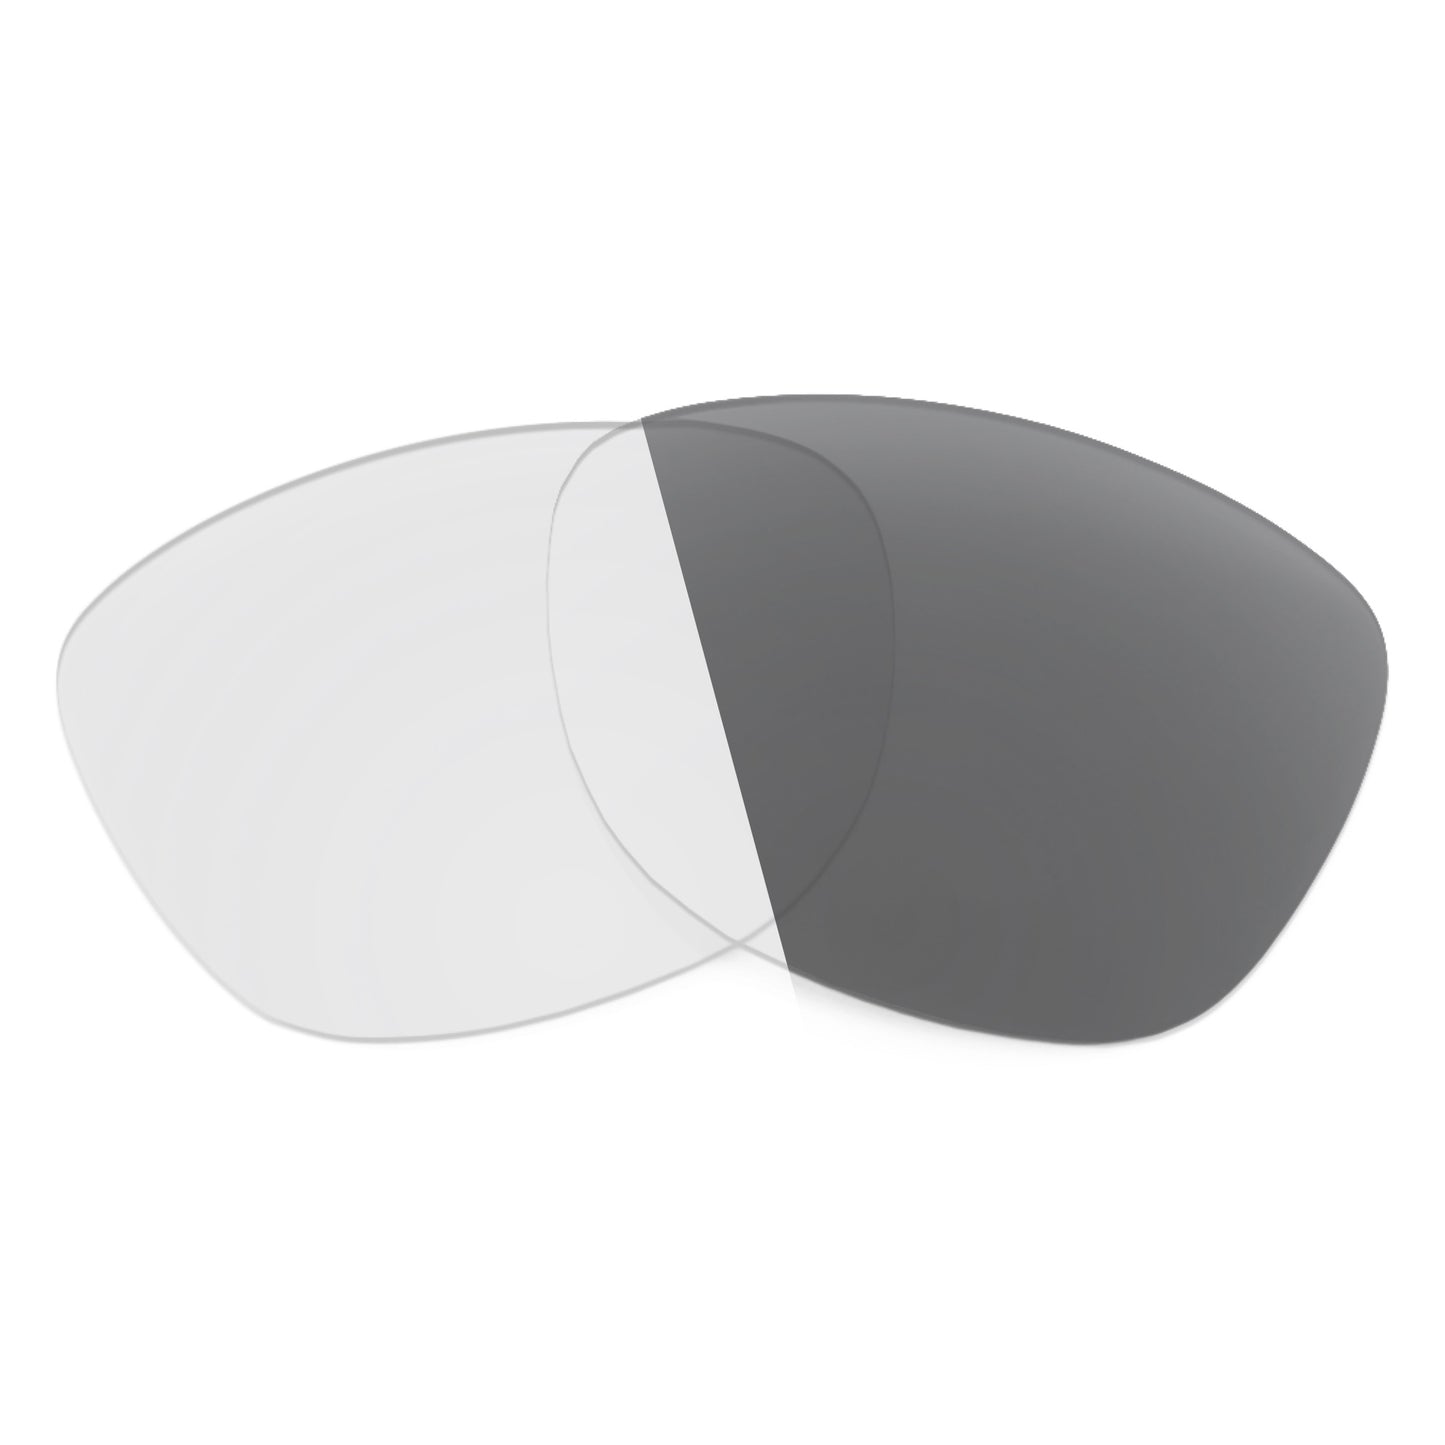 Revant replacement lenses for Ray-Ban John RB2194 53mm Non-Polarized Adapt Gray Photochromic